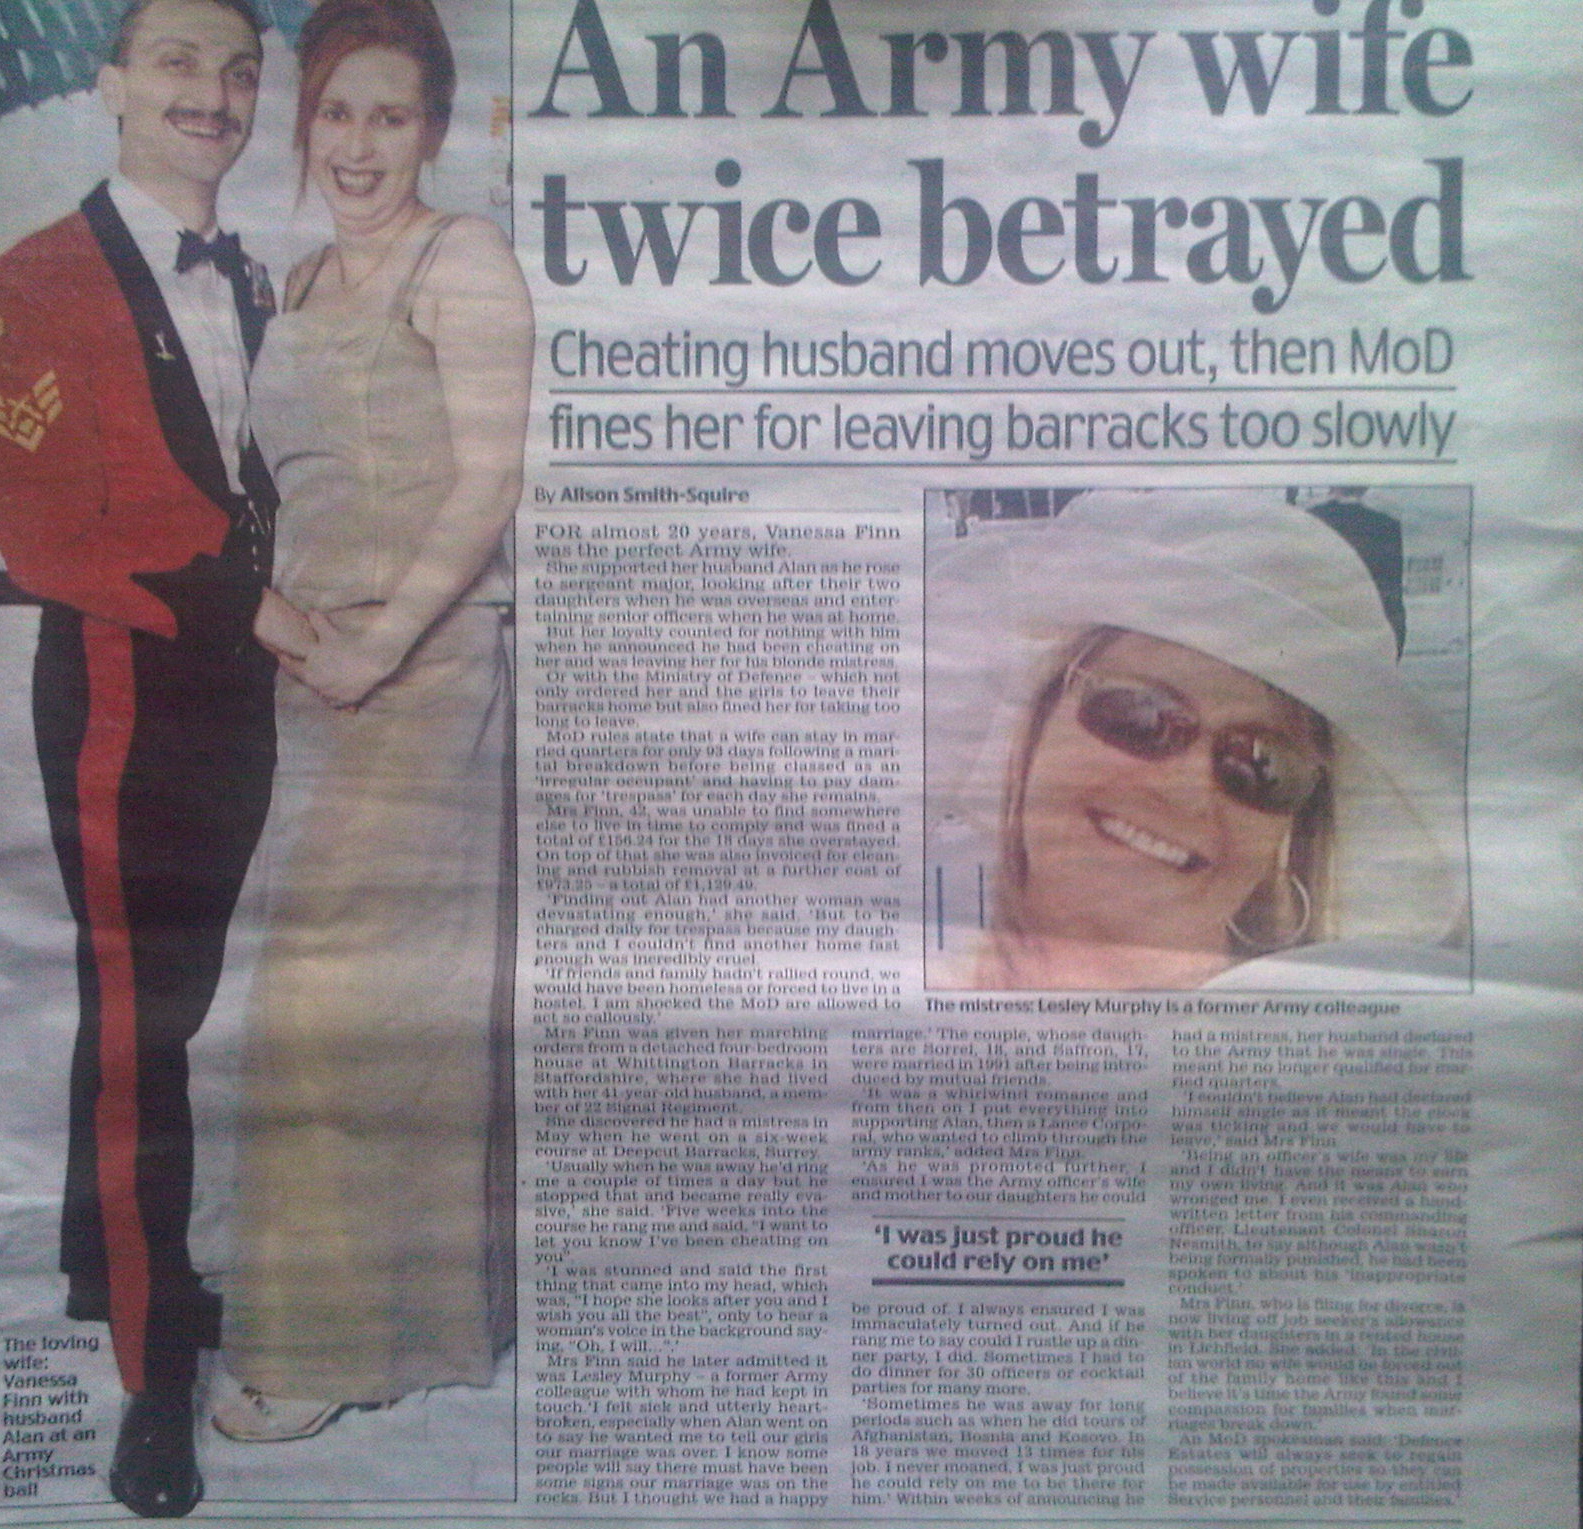 The army wife twice betrayed by 'love rat' husband and the MOD...